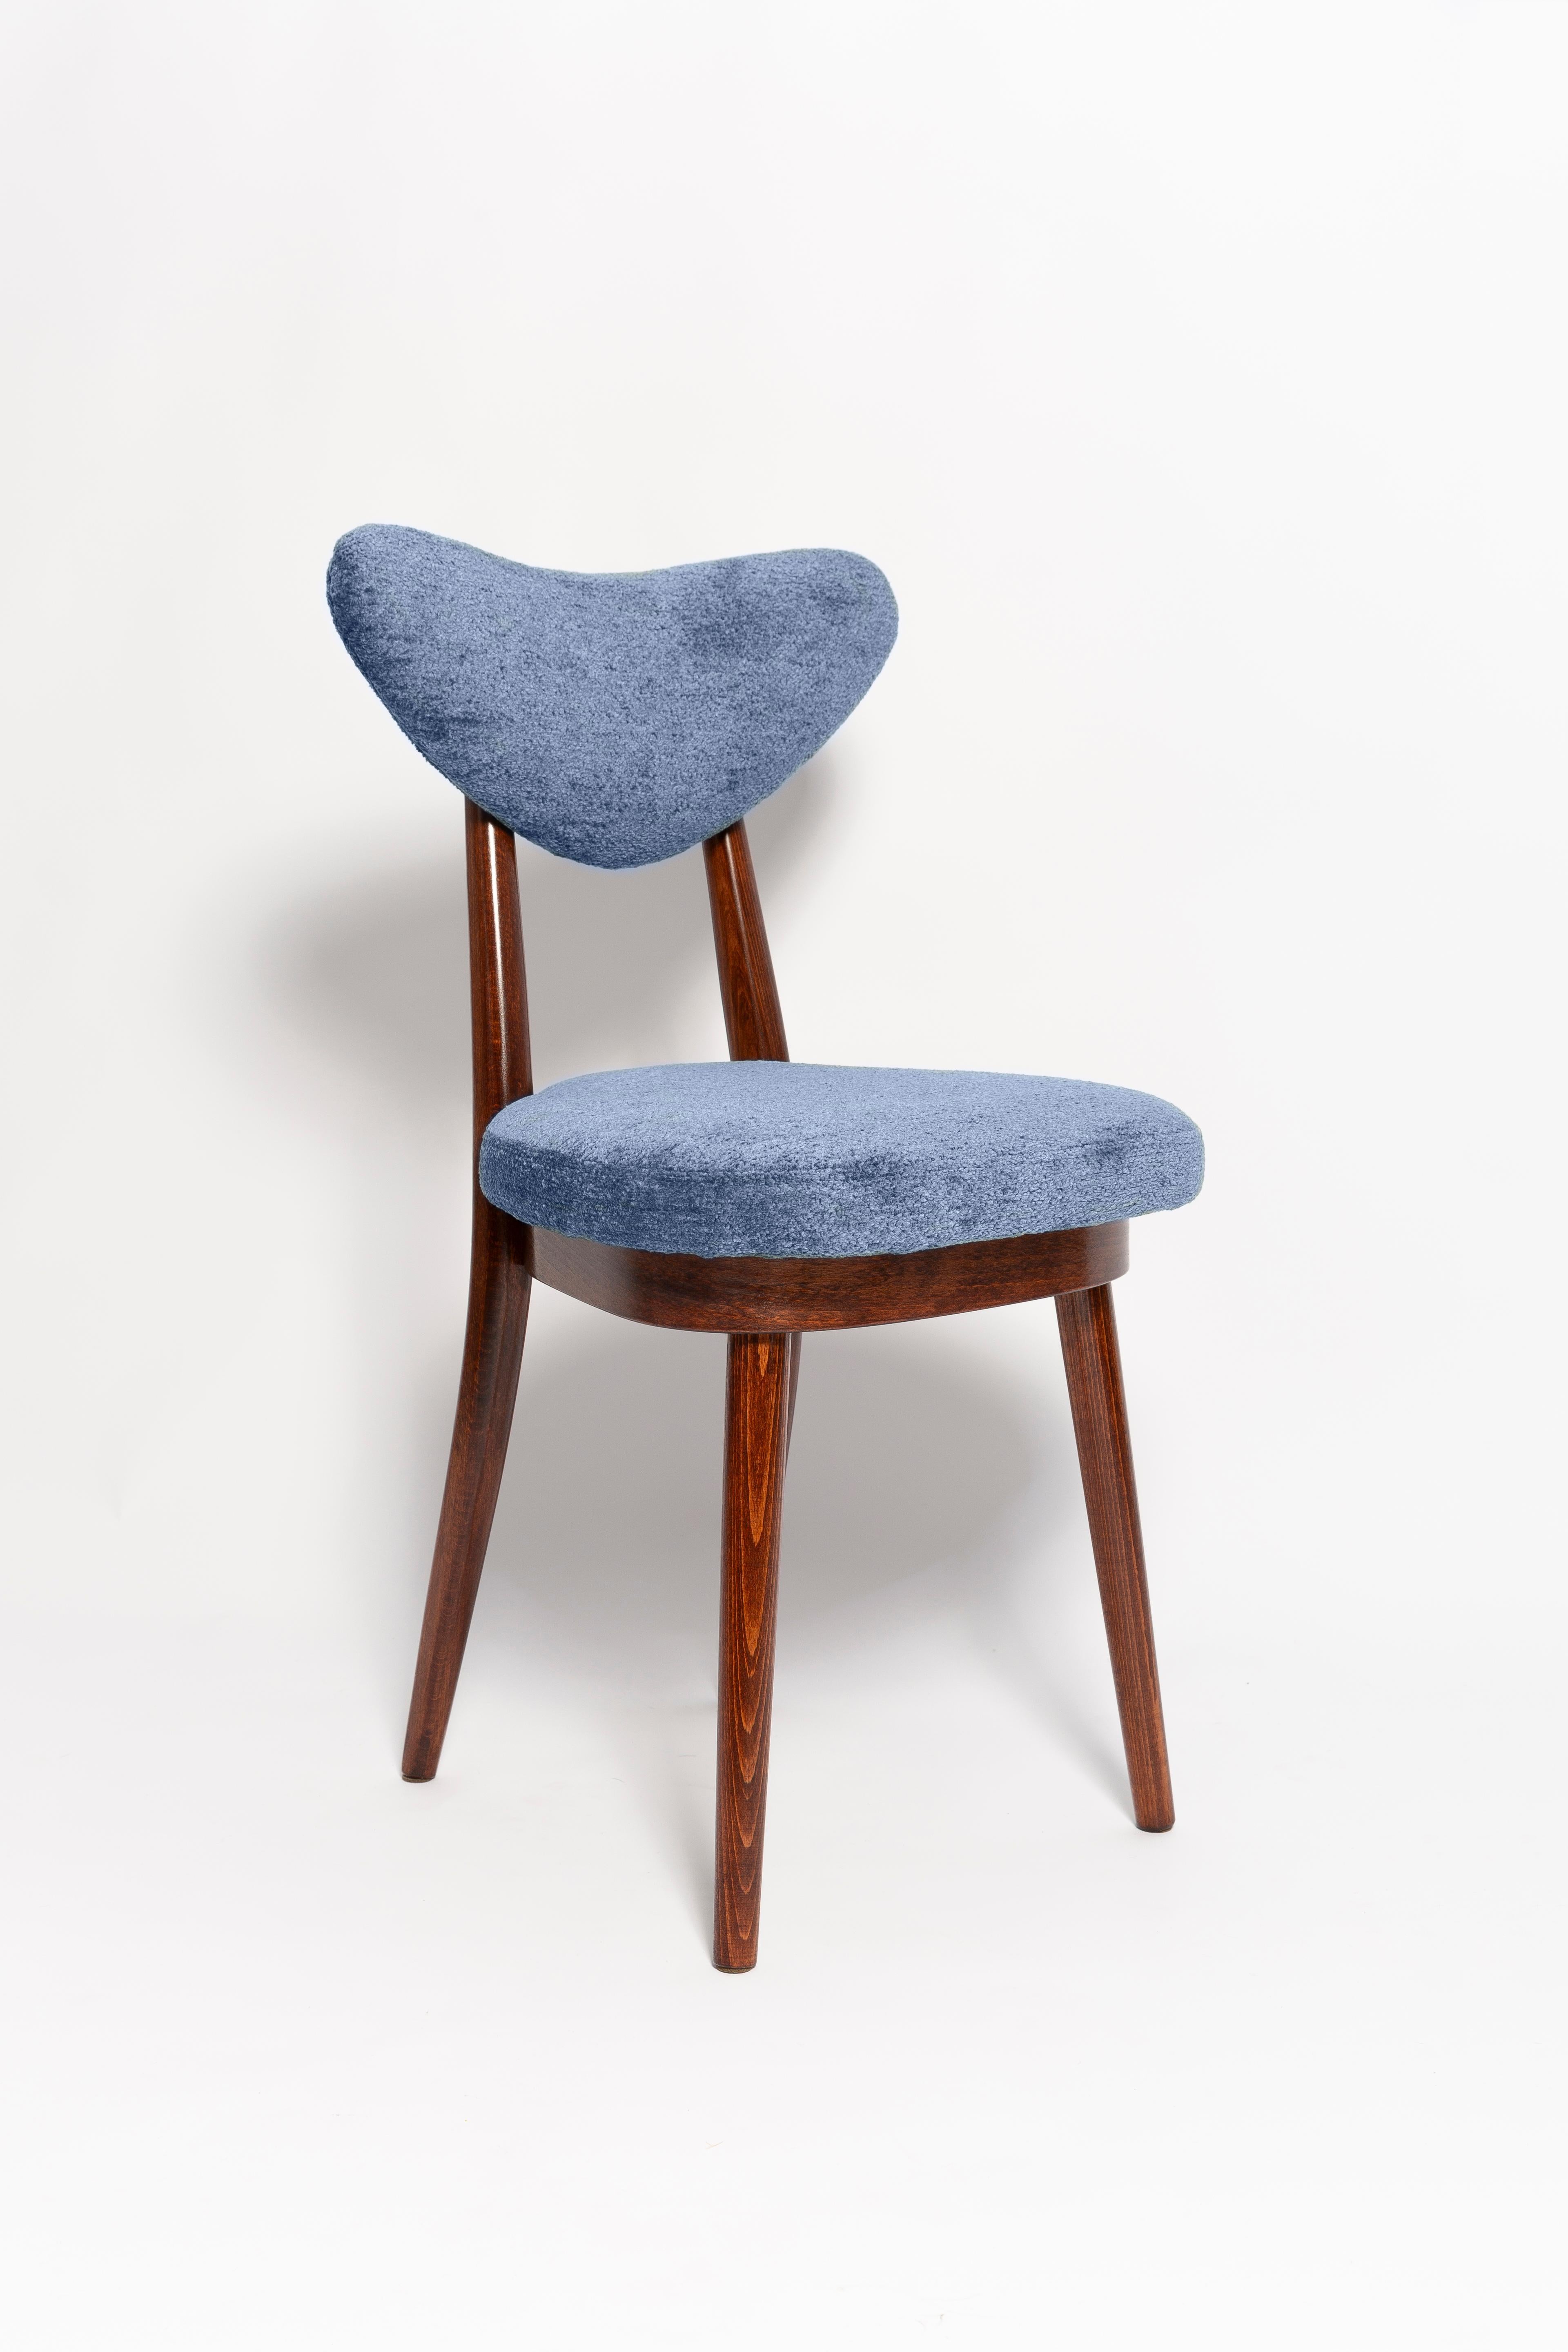 Mid Century Heart Chair and Stool, Blue Velvet, Dark Wood, Europe 1960s In Excellent Condition For Sale In 05-080 Hornowek, PL